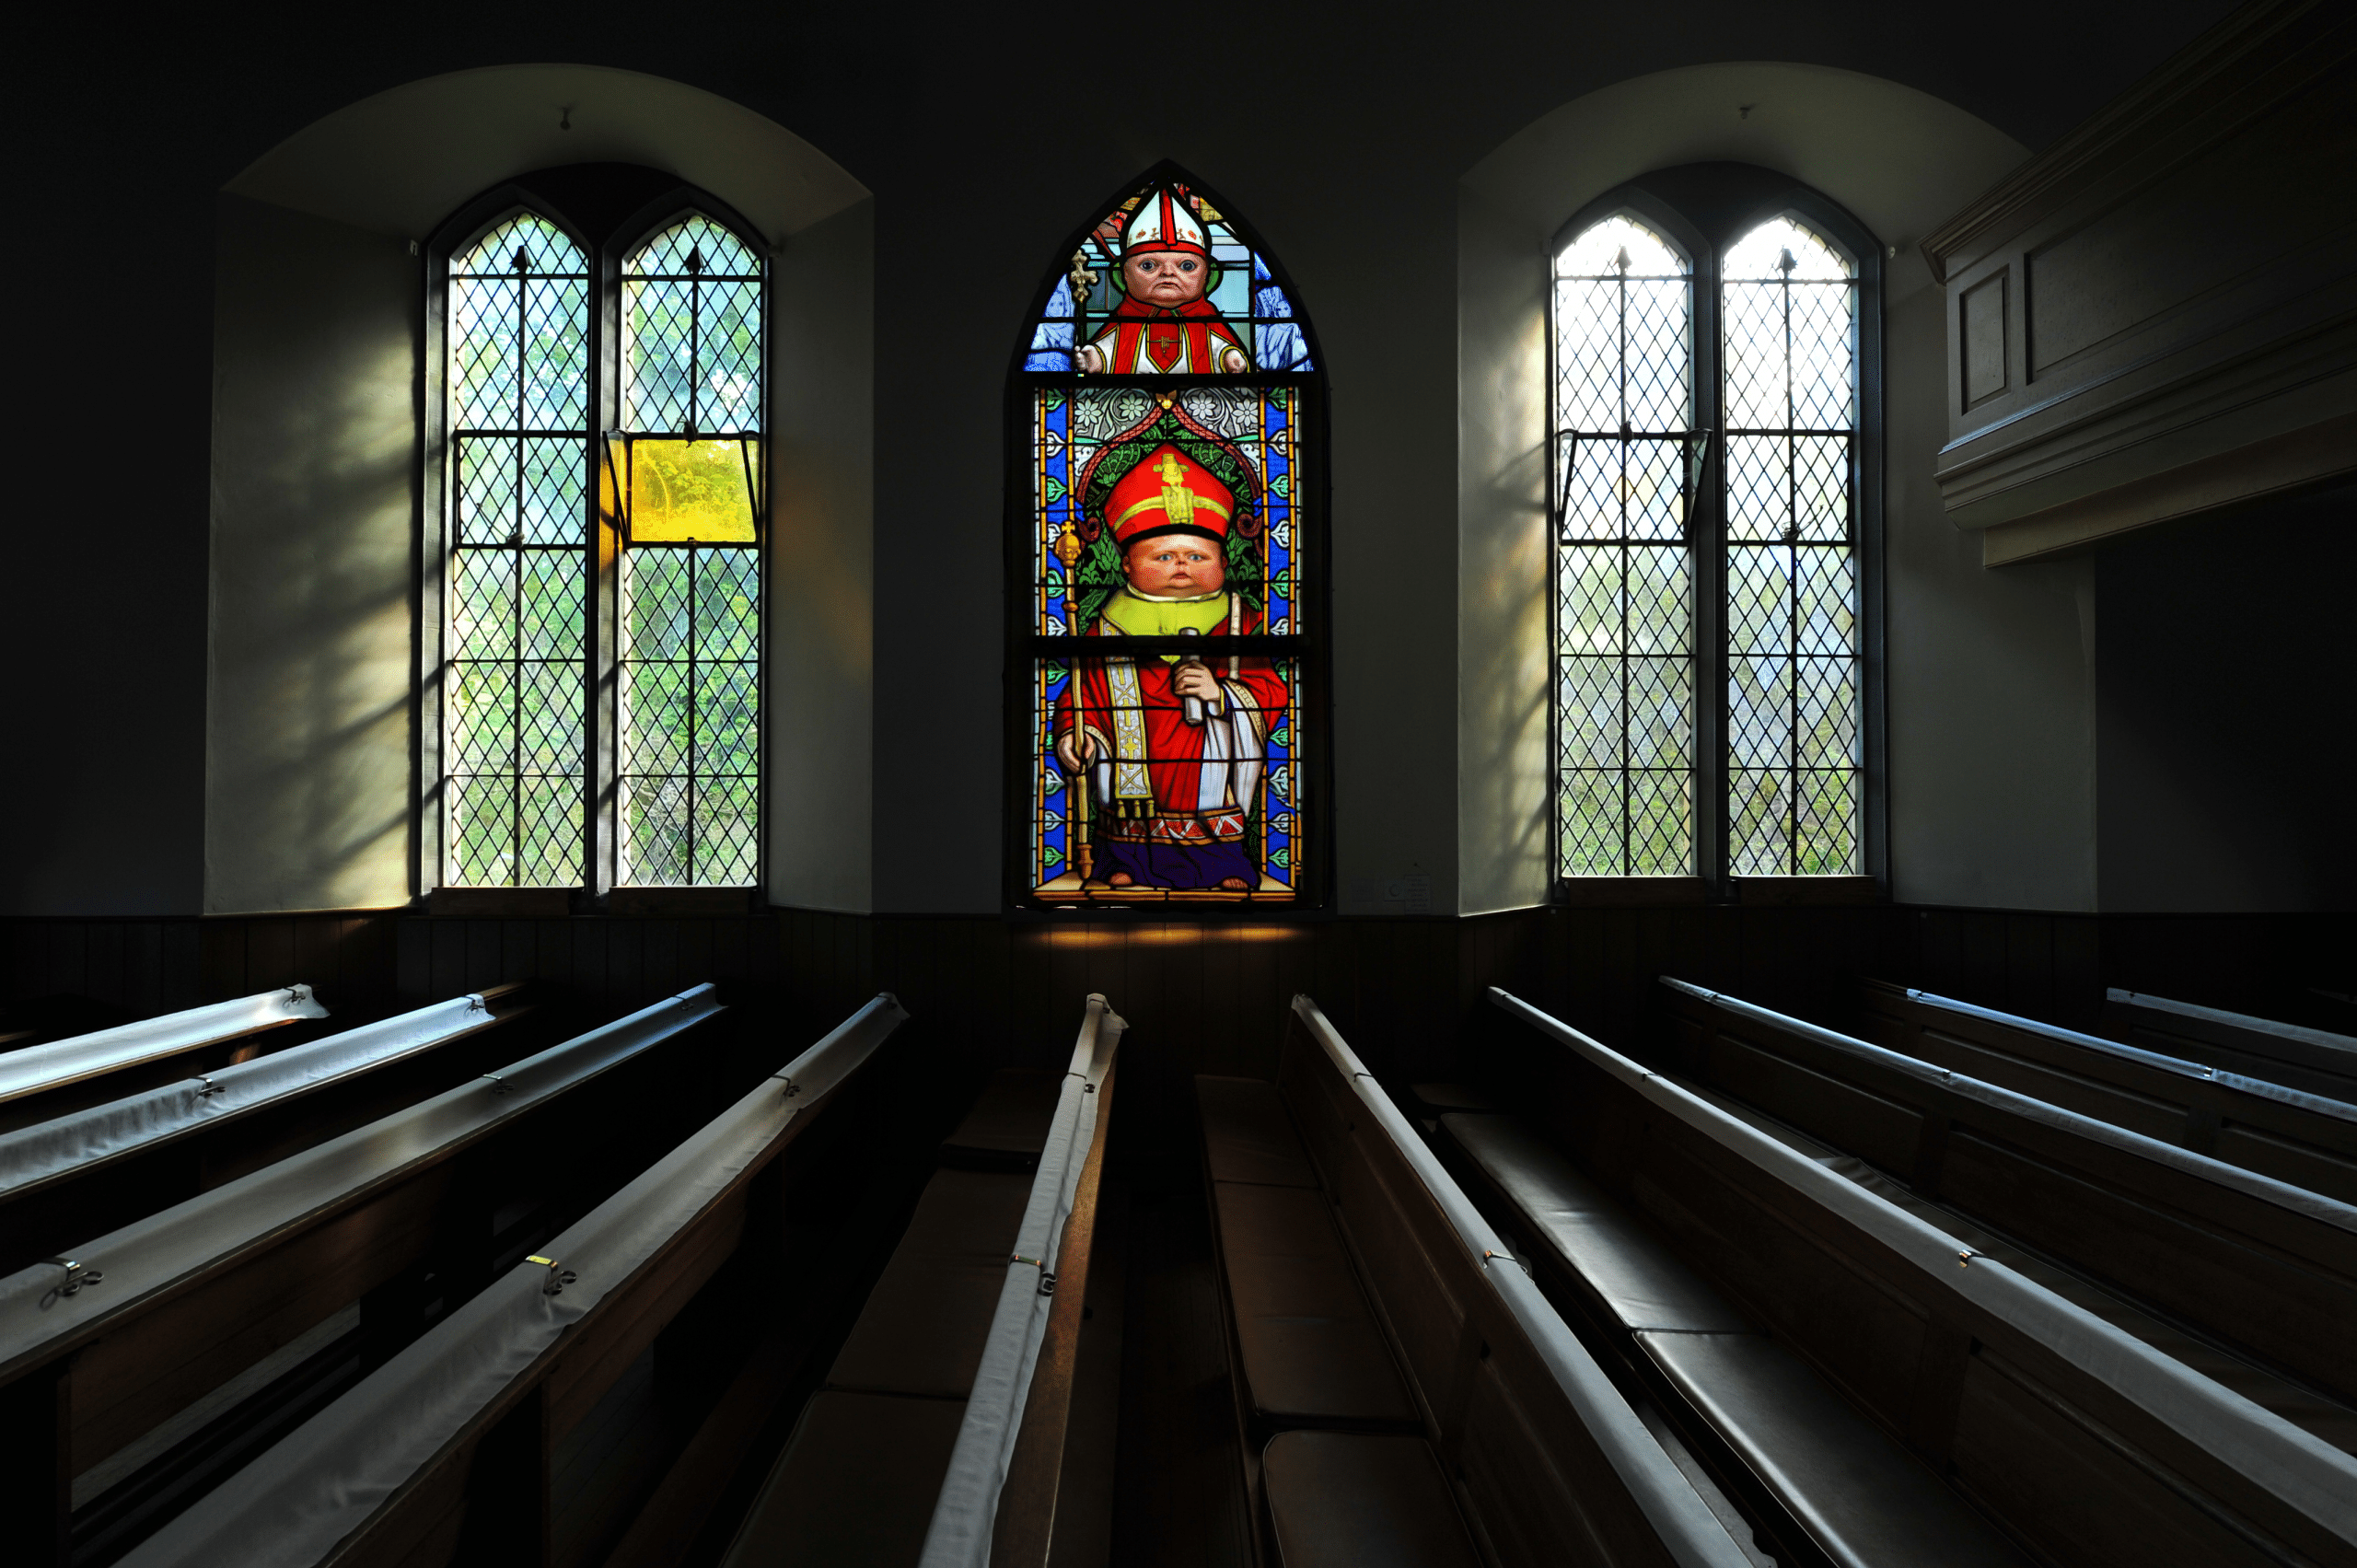 Stainglass window design in a church, satirical priests.